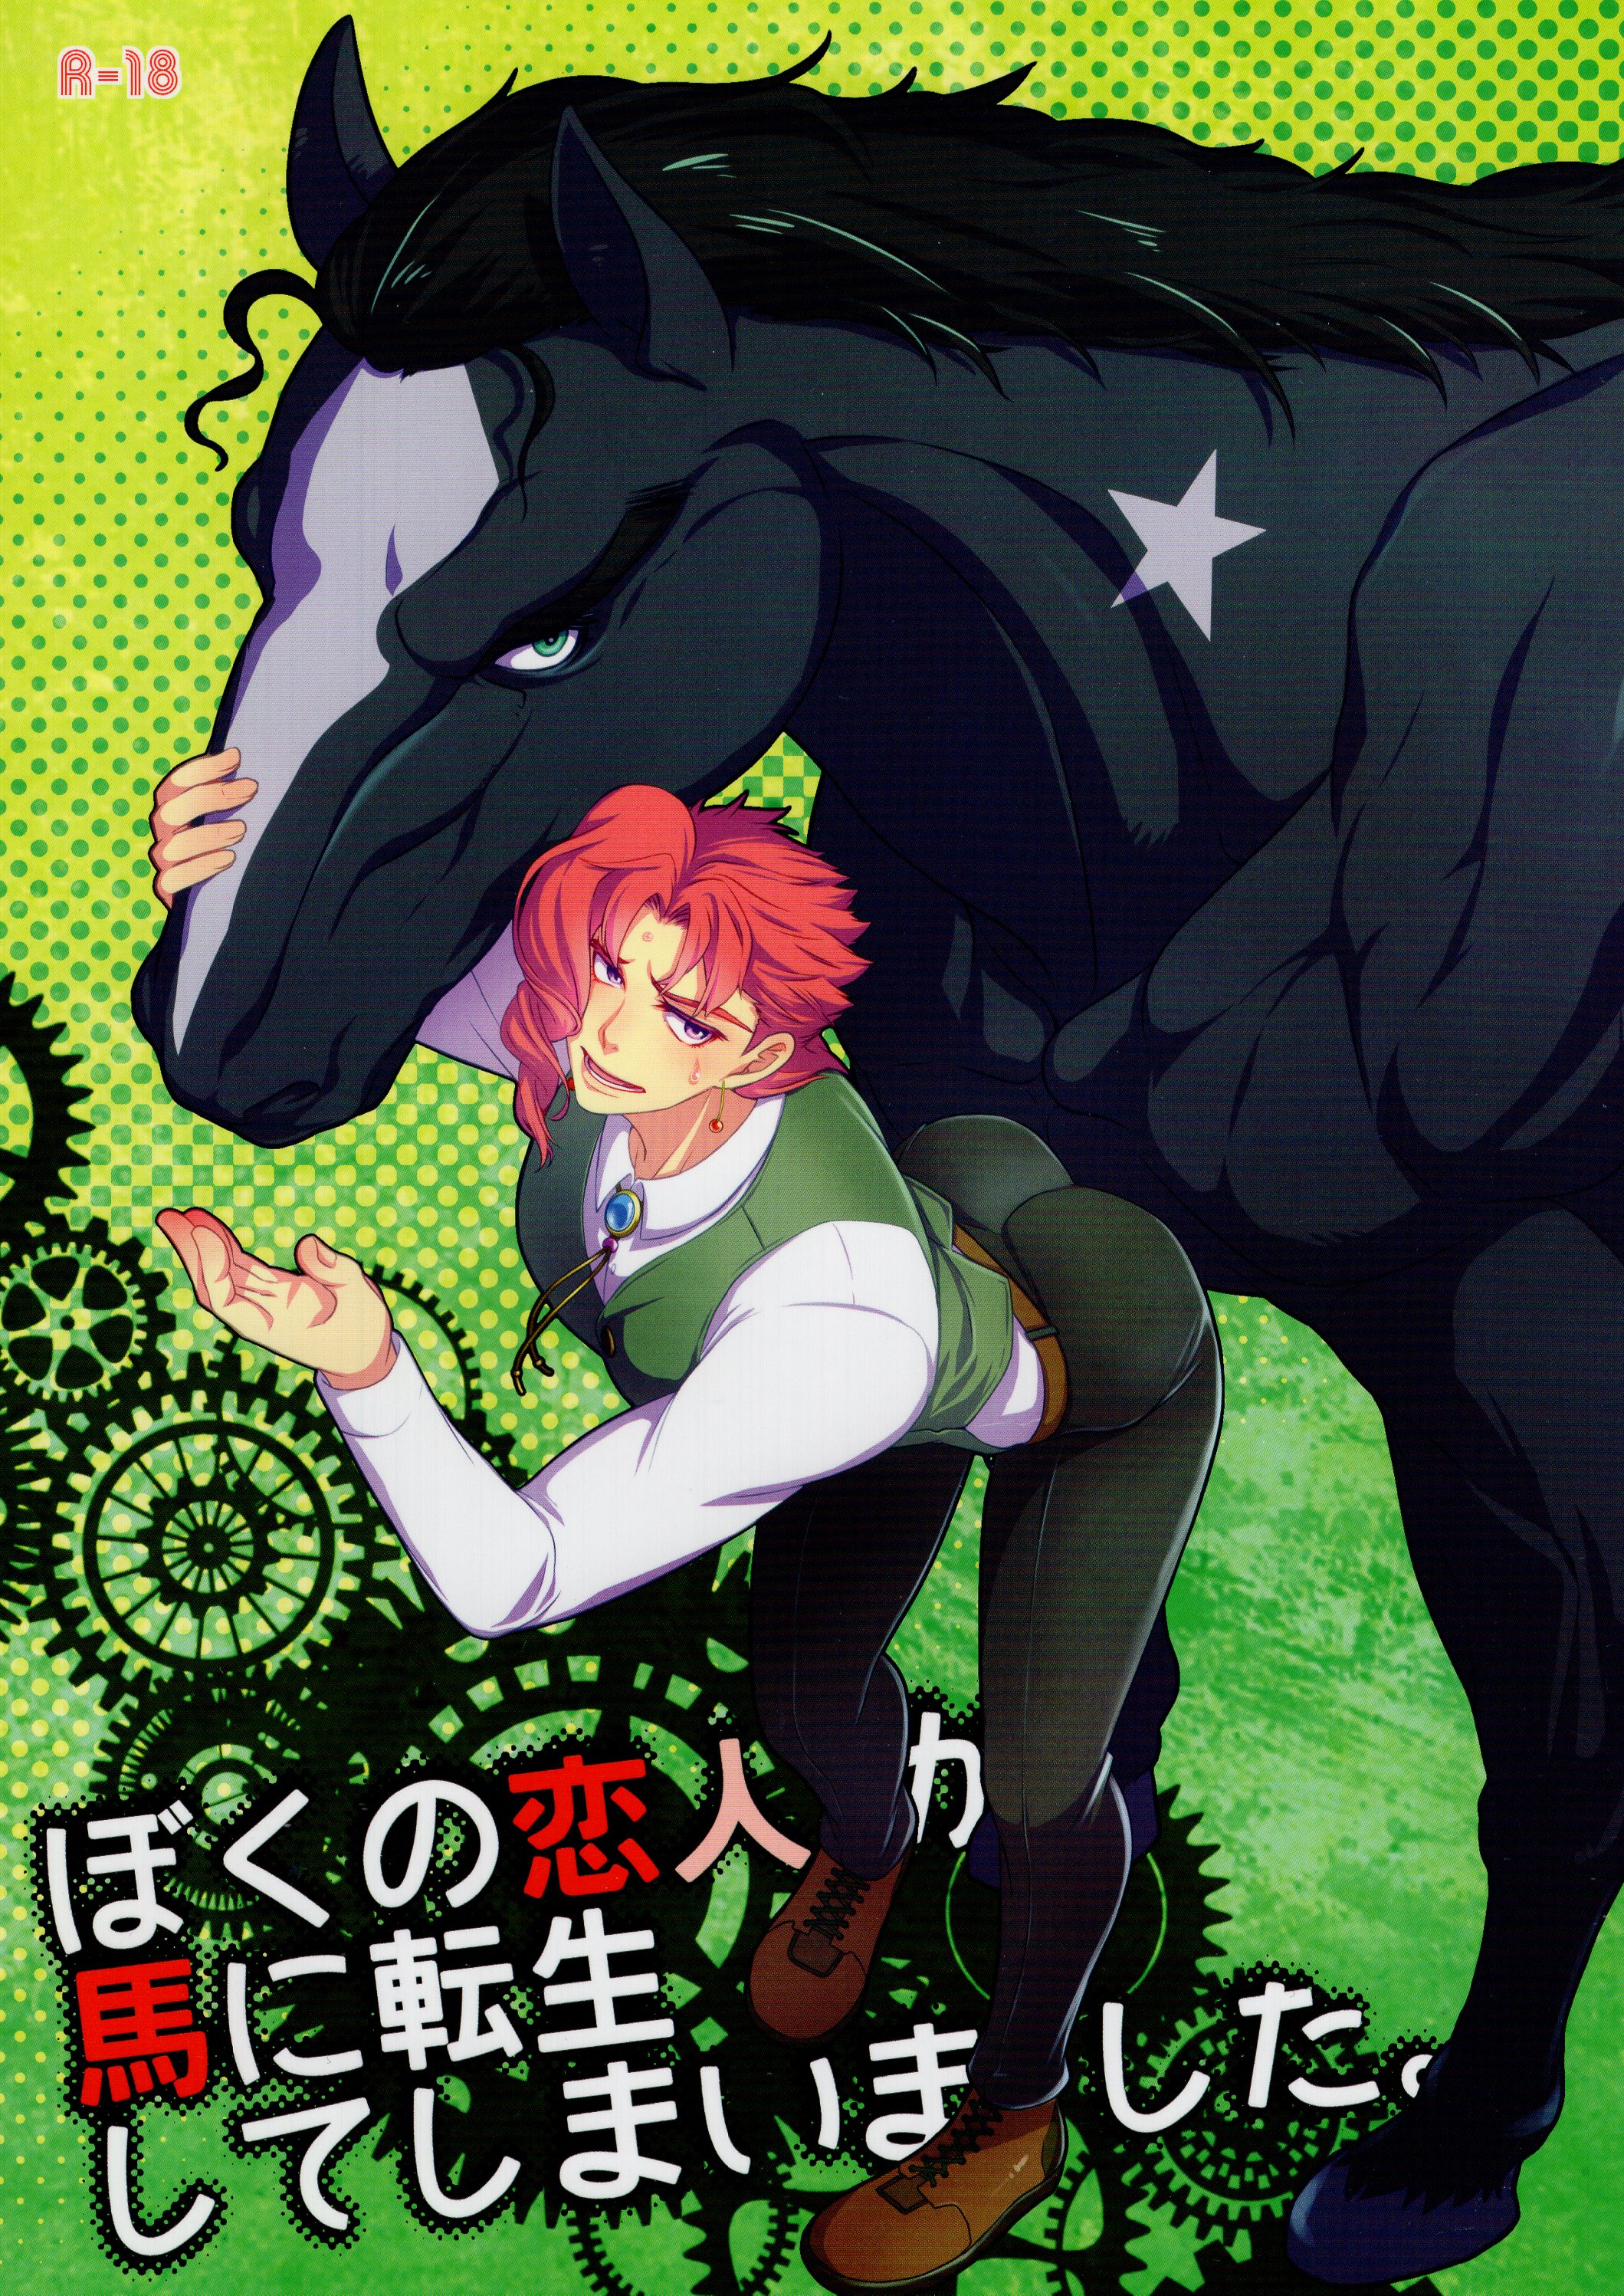 Beast Trail My lover has incarnated on a horse. | Mandarake Online Shop